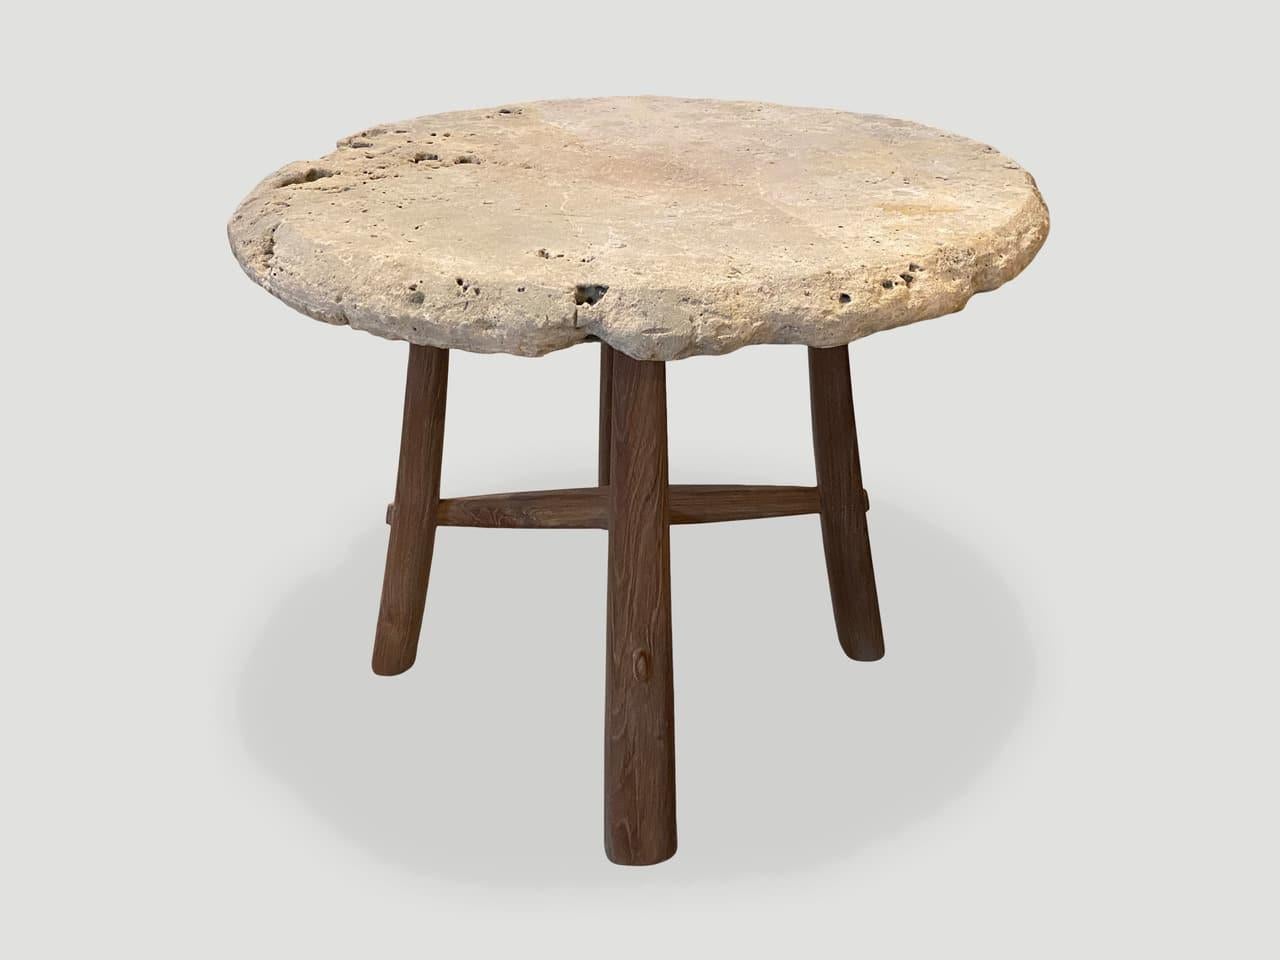 Andrianna Shamaris Century Old Sumba Stone Table In Excellent Condition For Sale In New York, NY